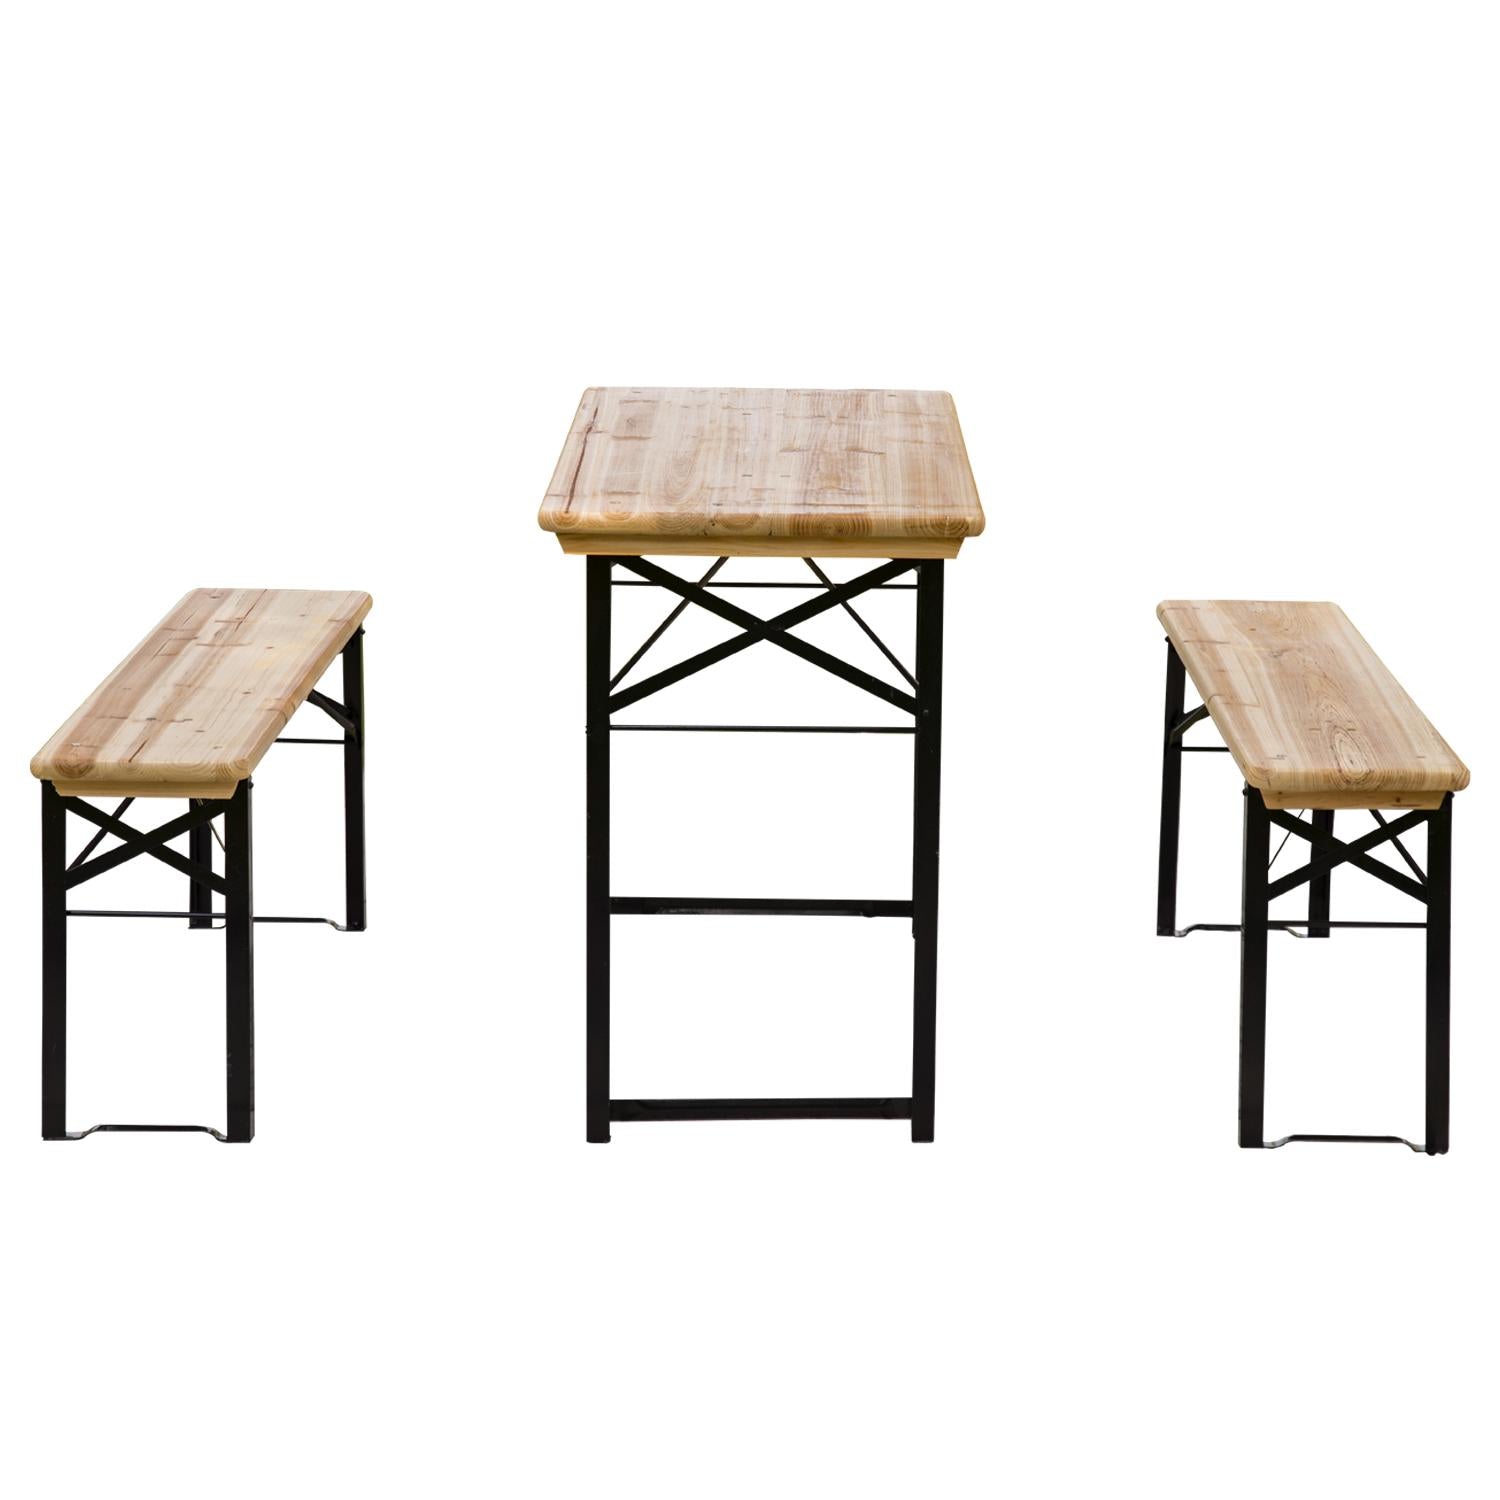 Picnic Wooden Table And Bench Set